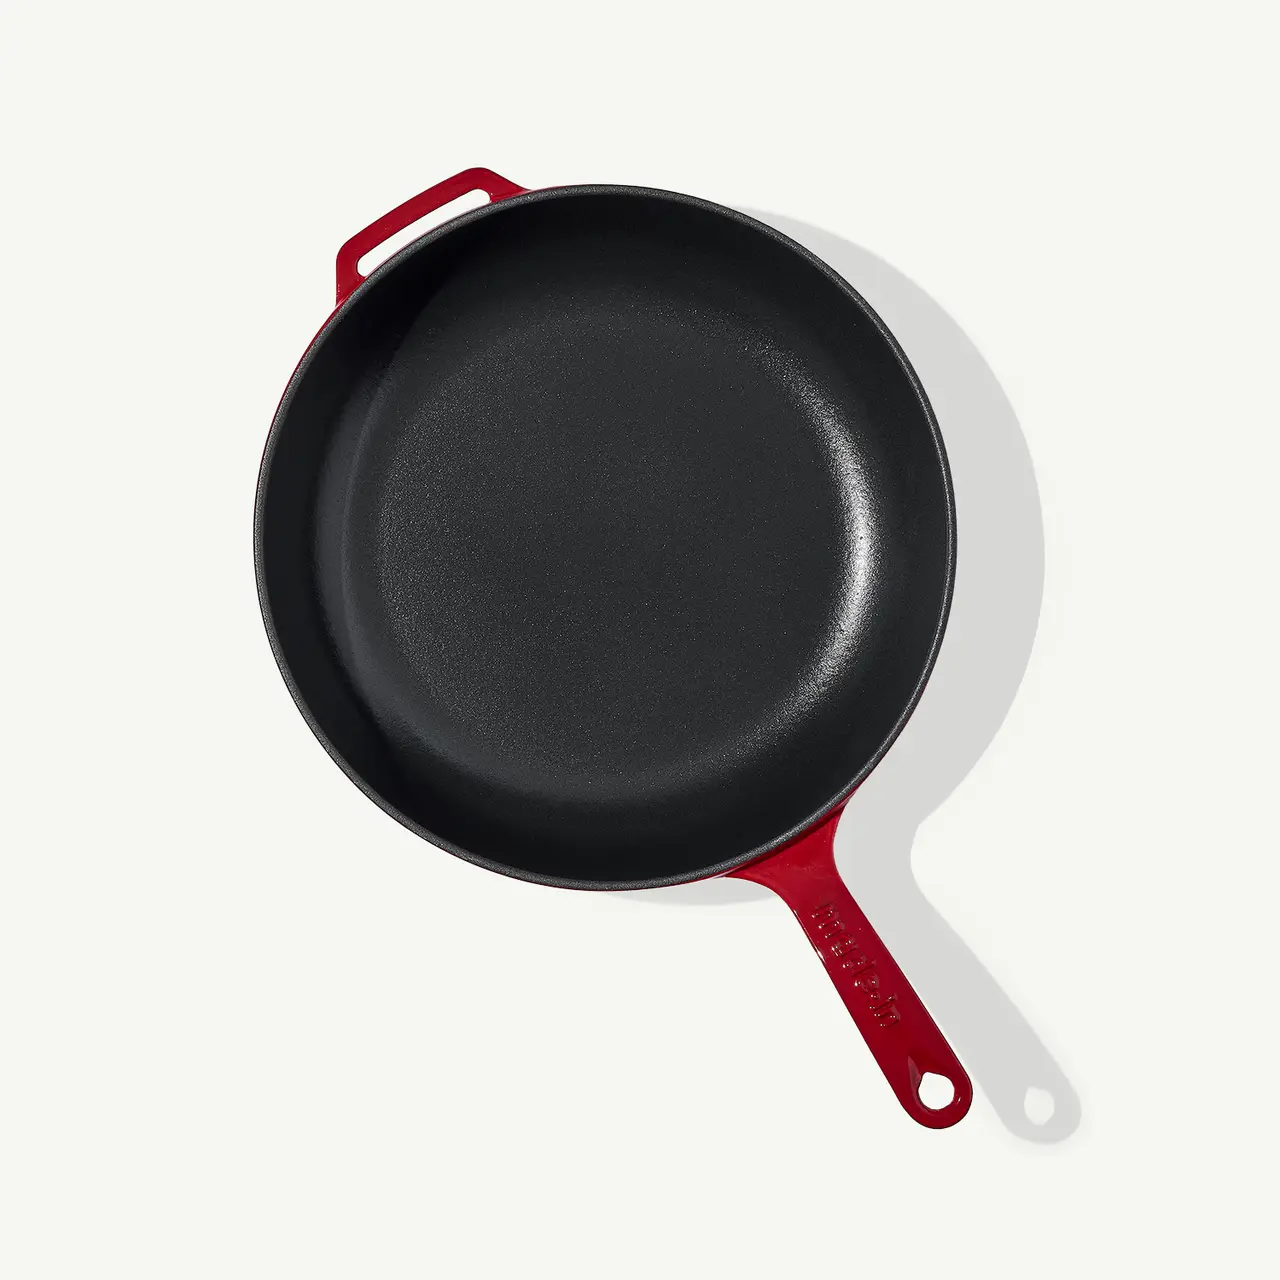 A black cast iron skillet with a red handle is positioned on a light gray background.